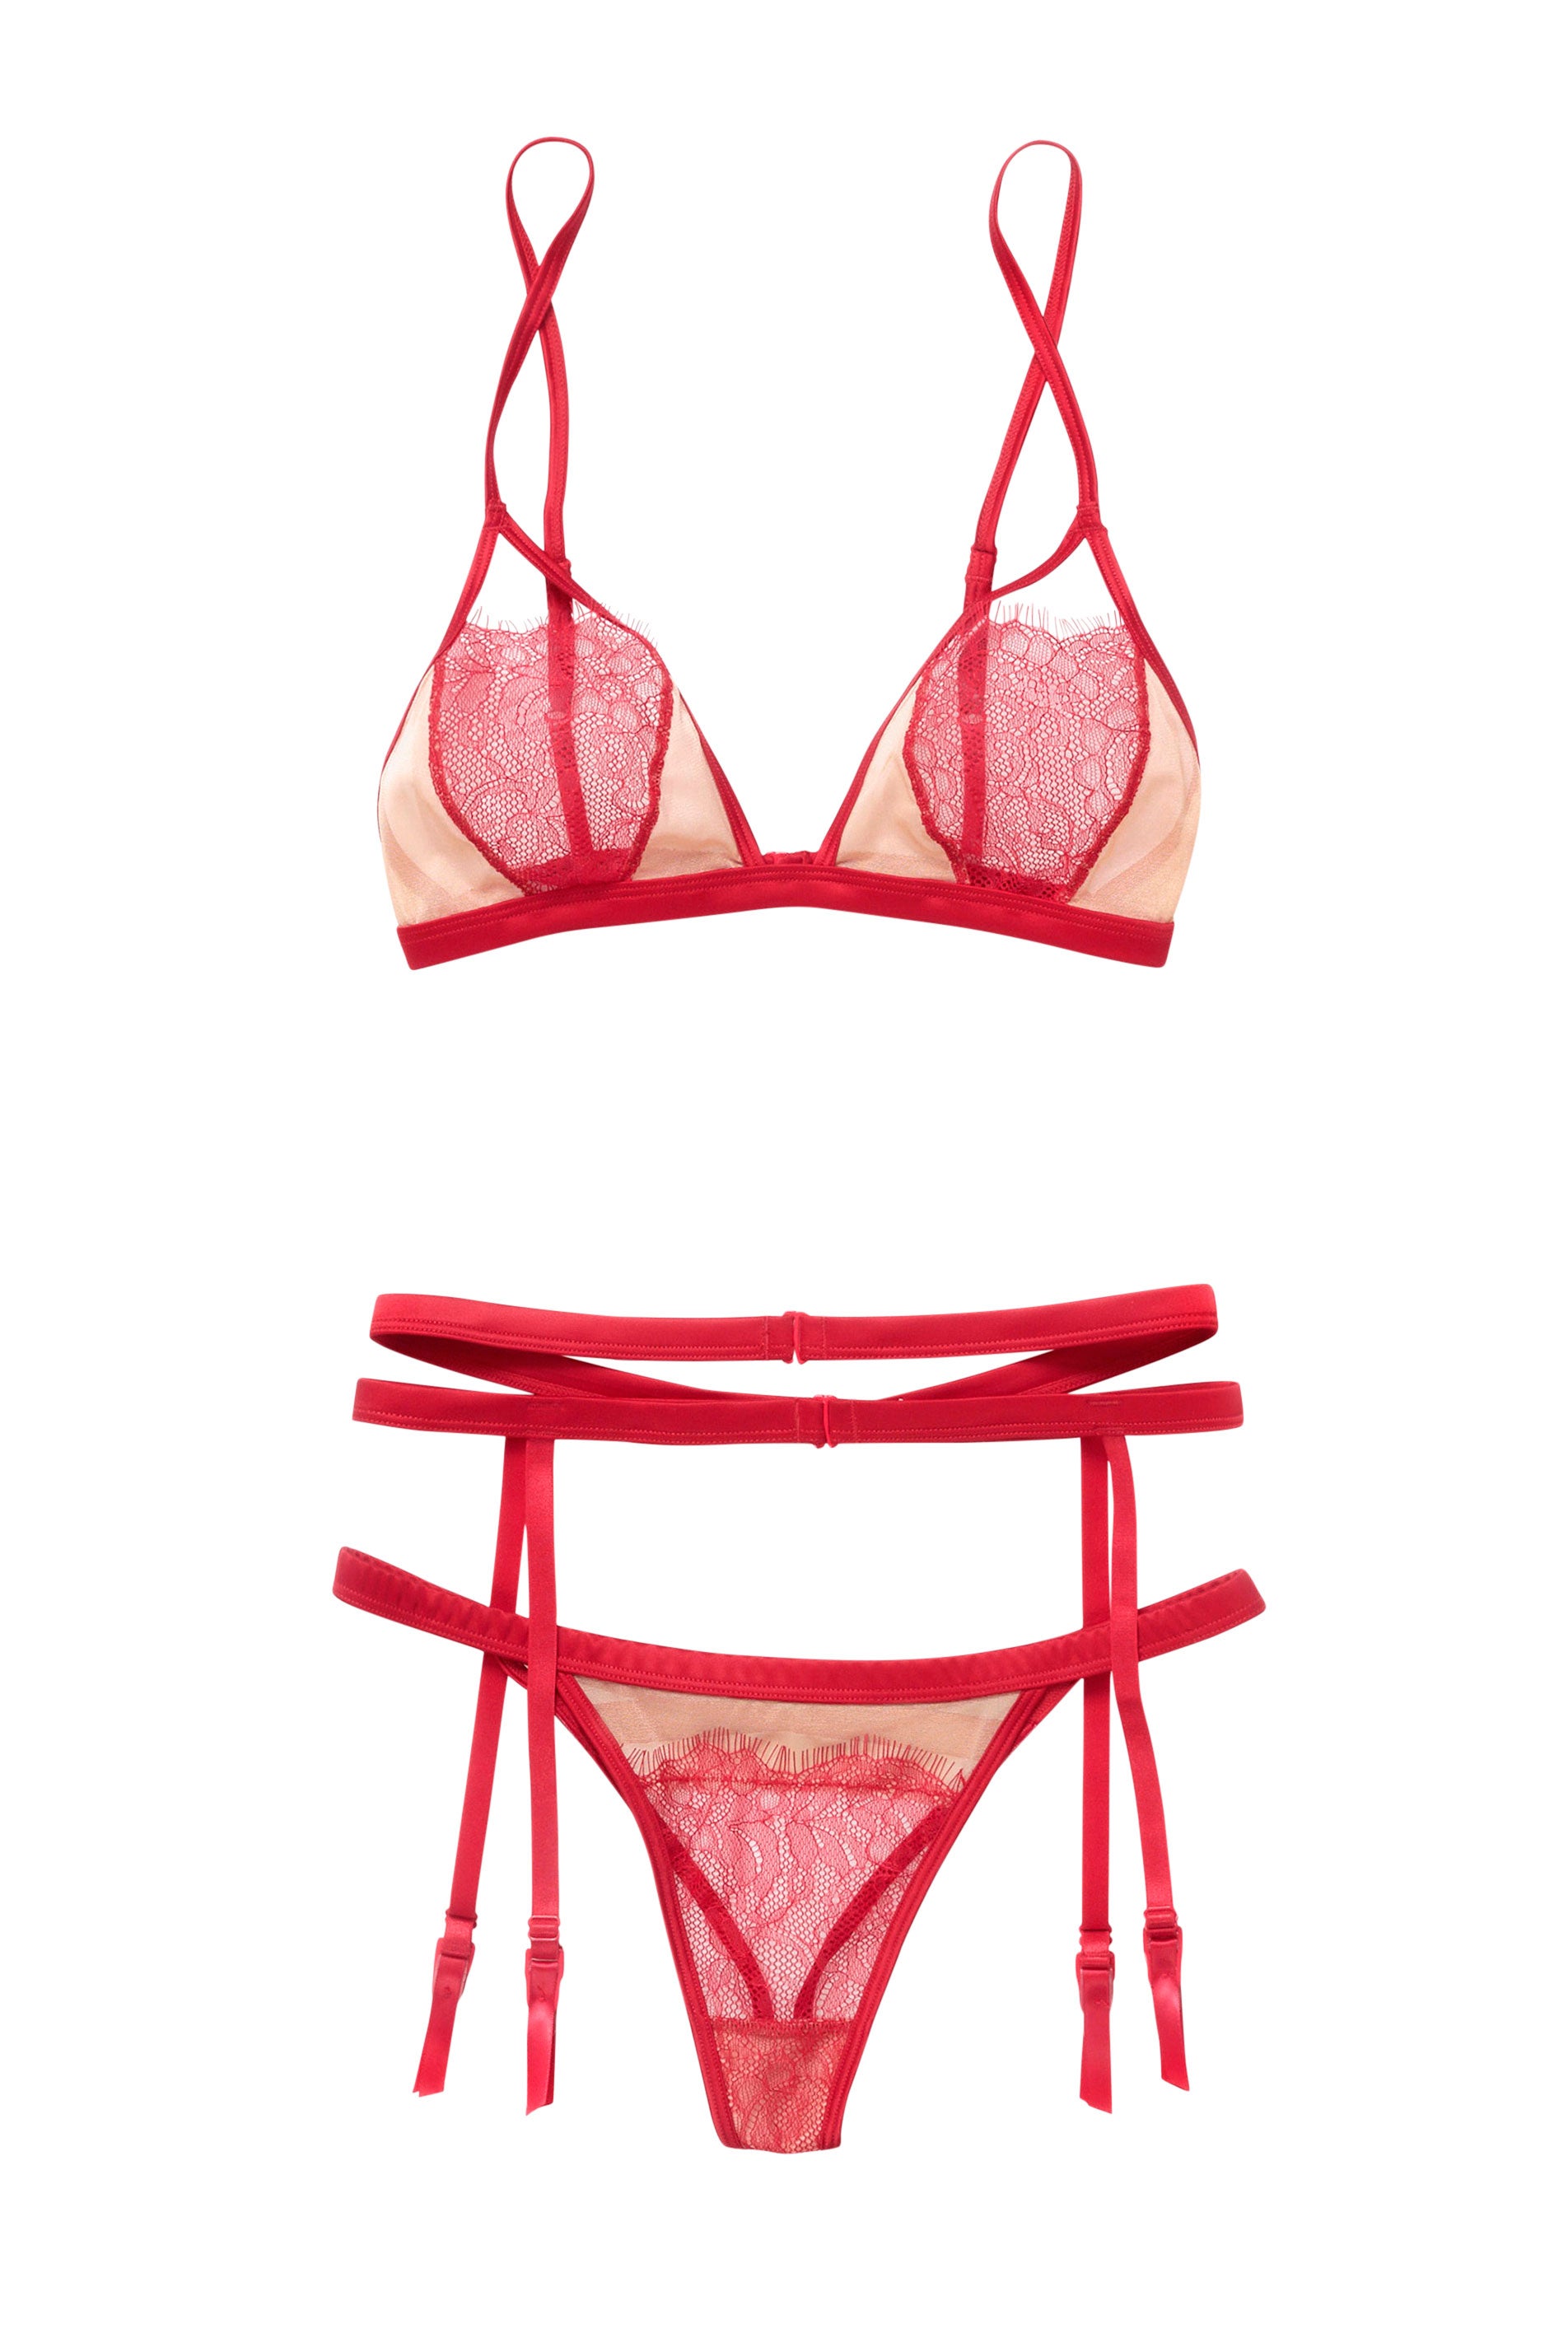 You'll Fall in Love With These Pretty Lingerie Sets | Essence